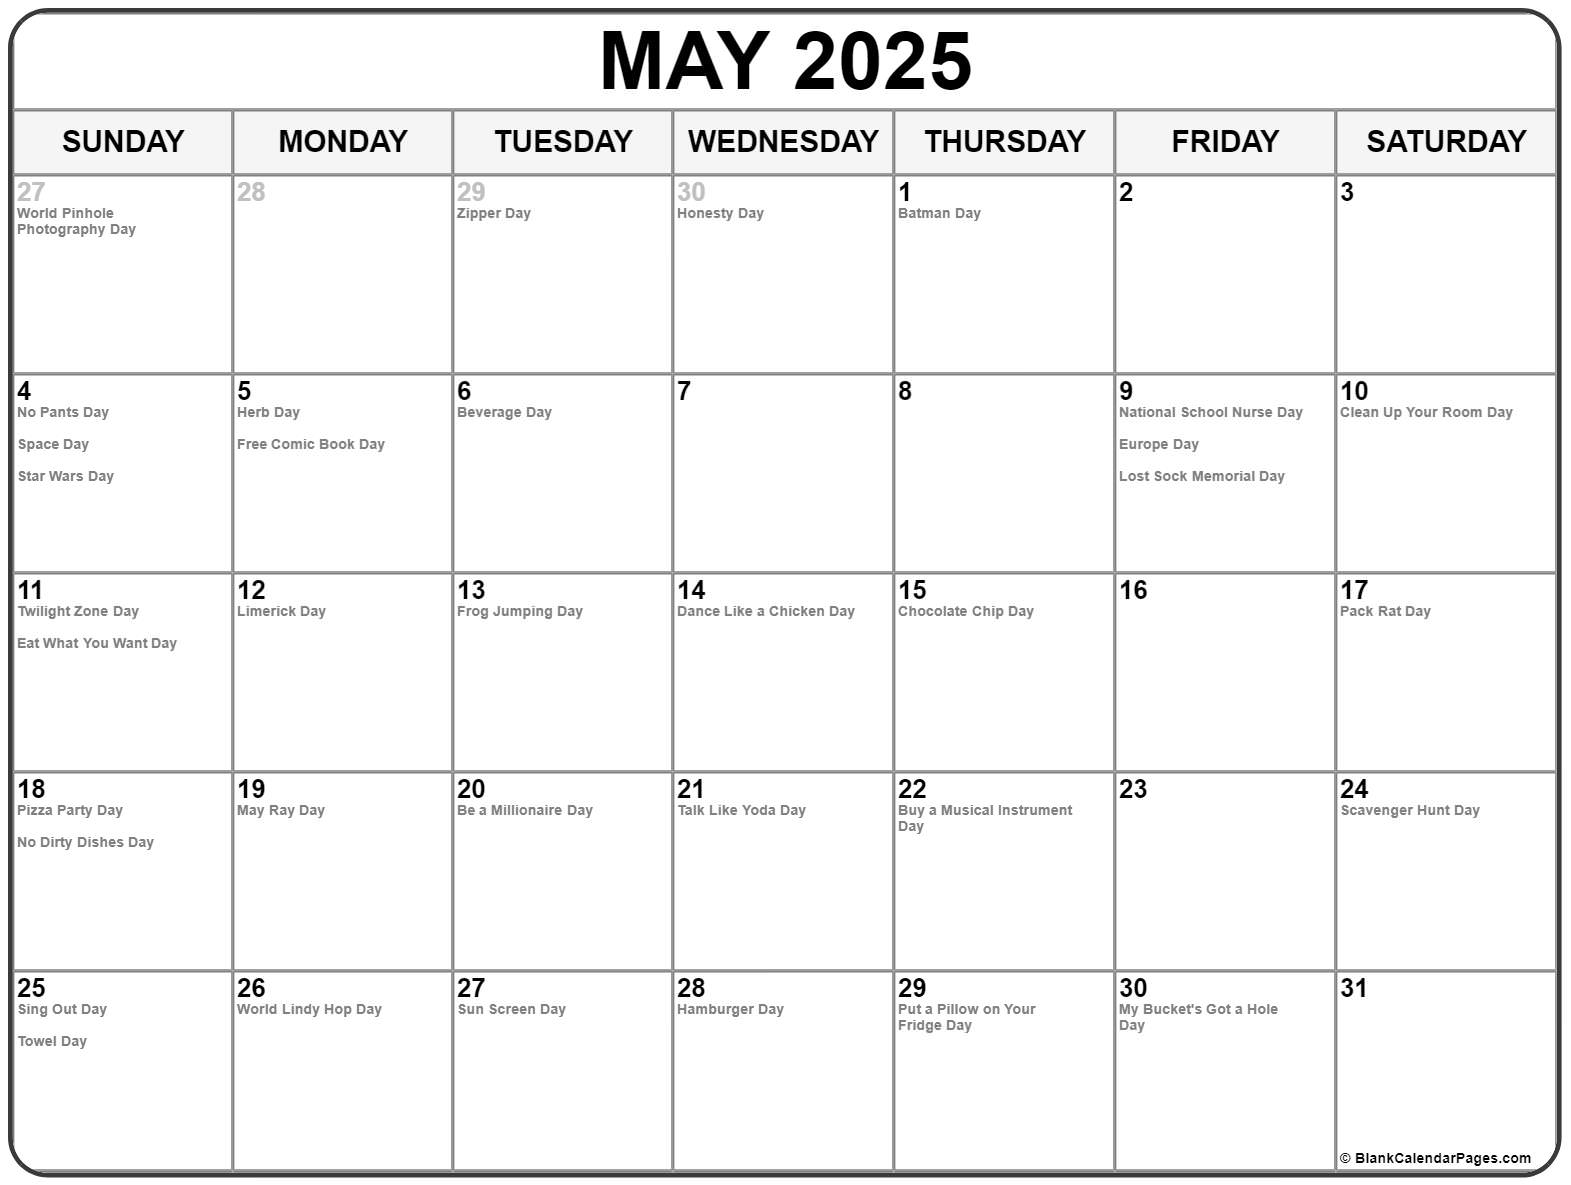 may-2025-with-holidays-calendar